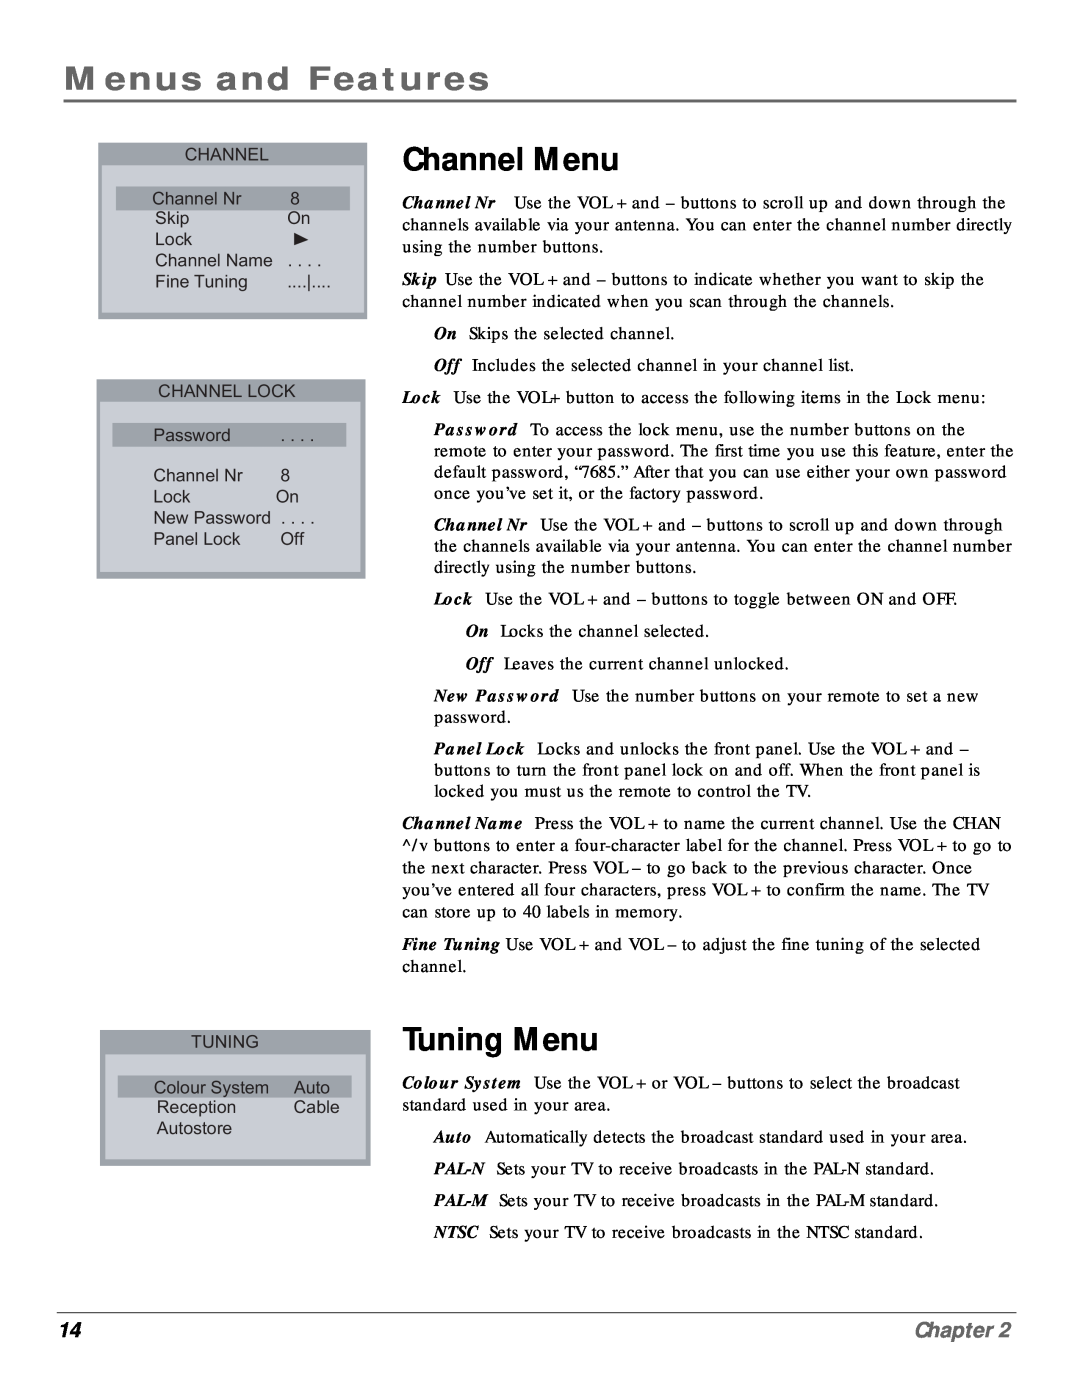 RCA CR20310 manual Channel Menu, Tuning Menu, Menus and Features, Chapter 